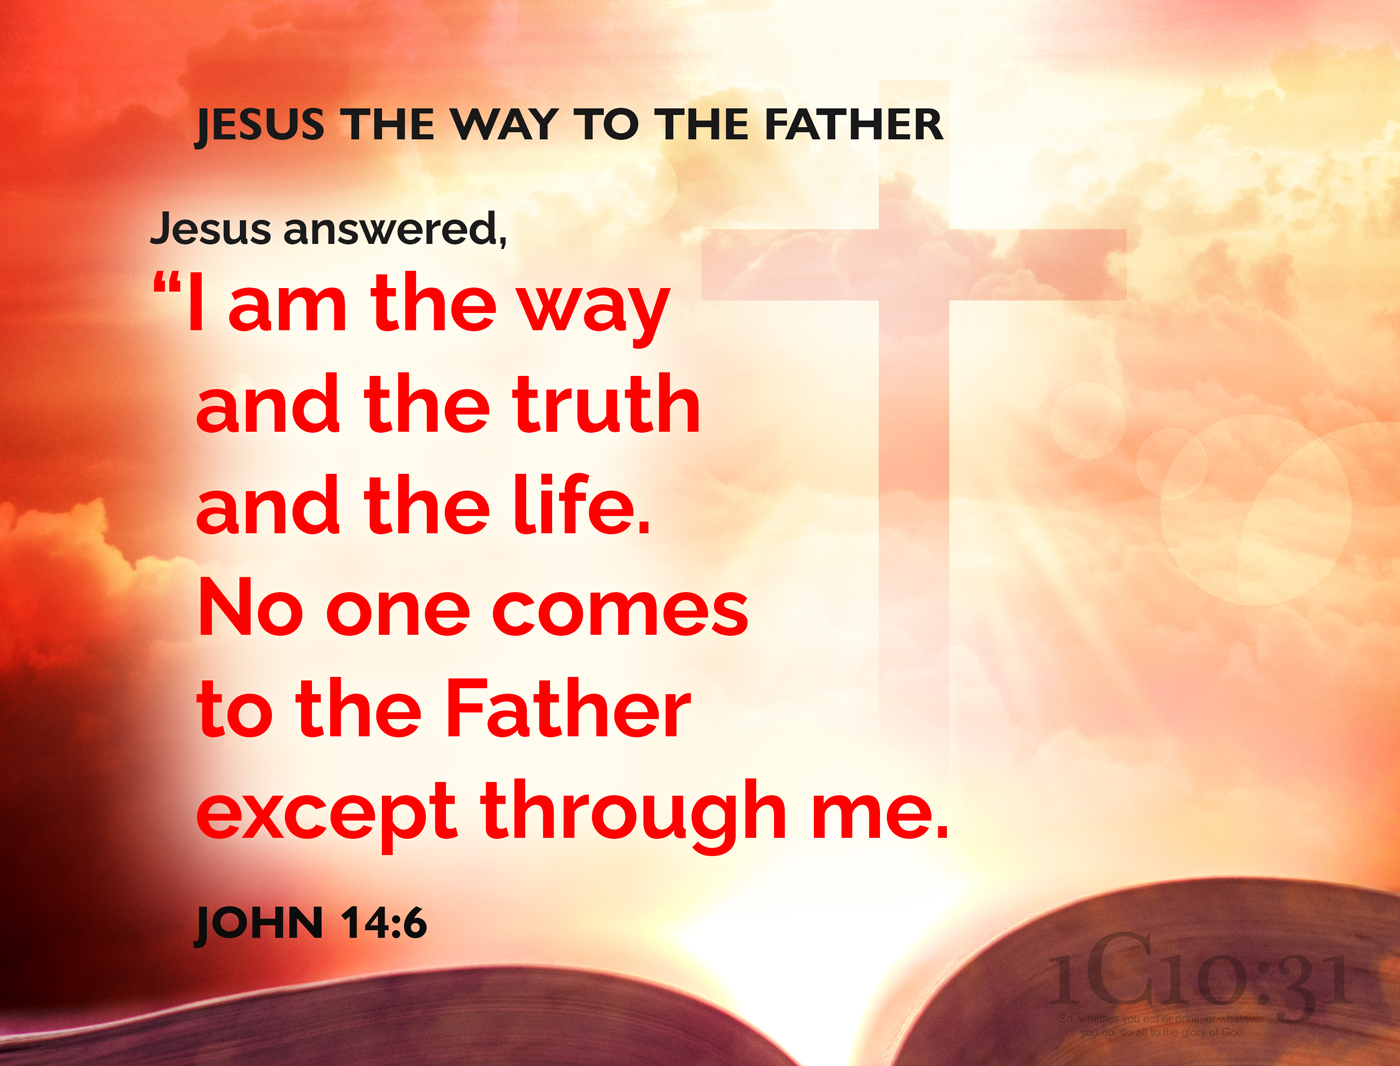 Jesus the Way to the Father